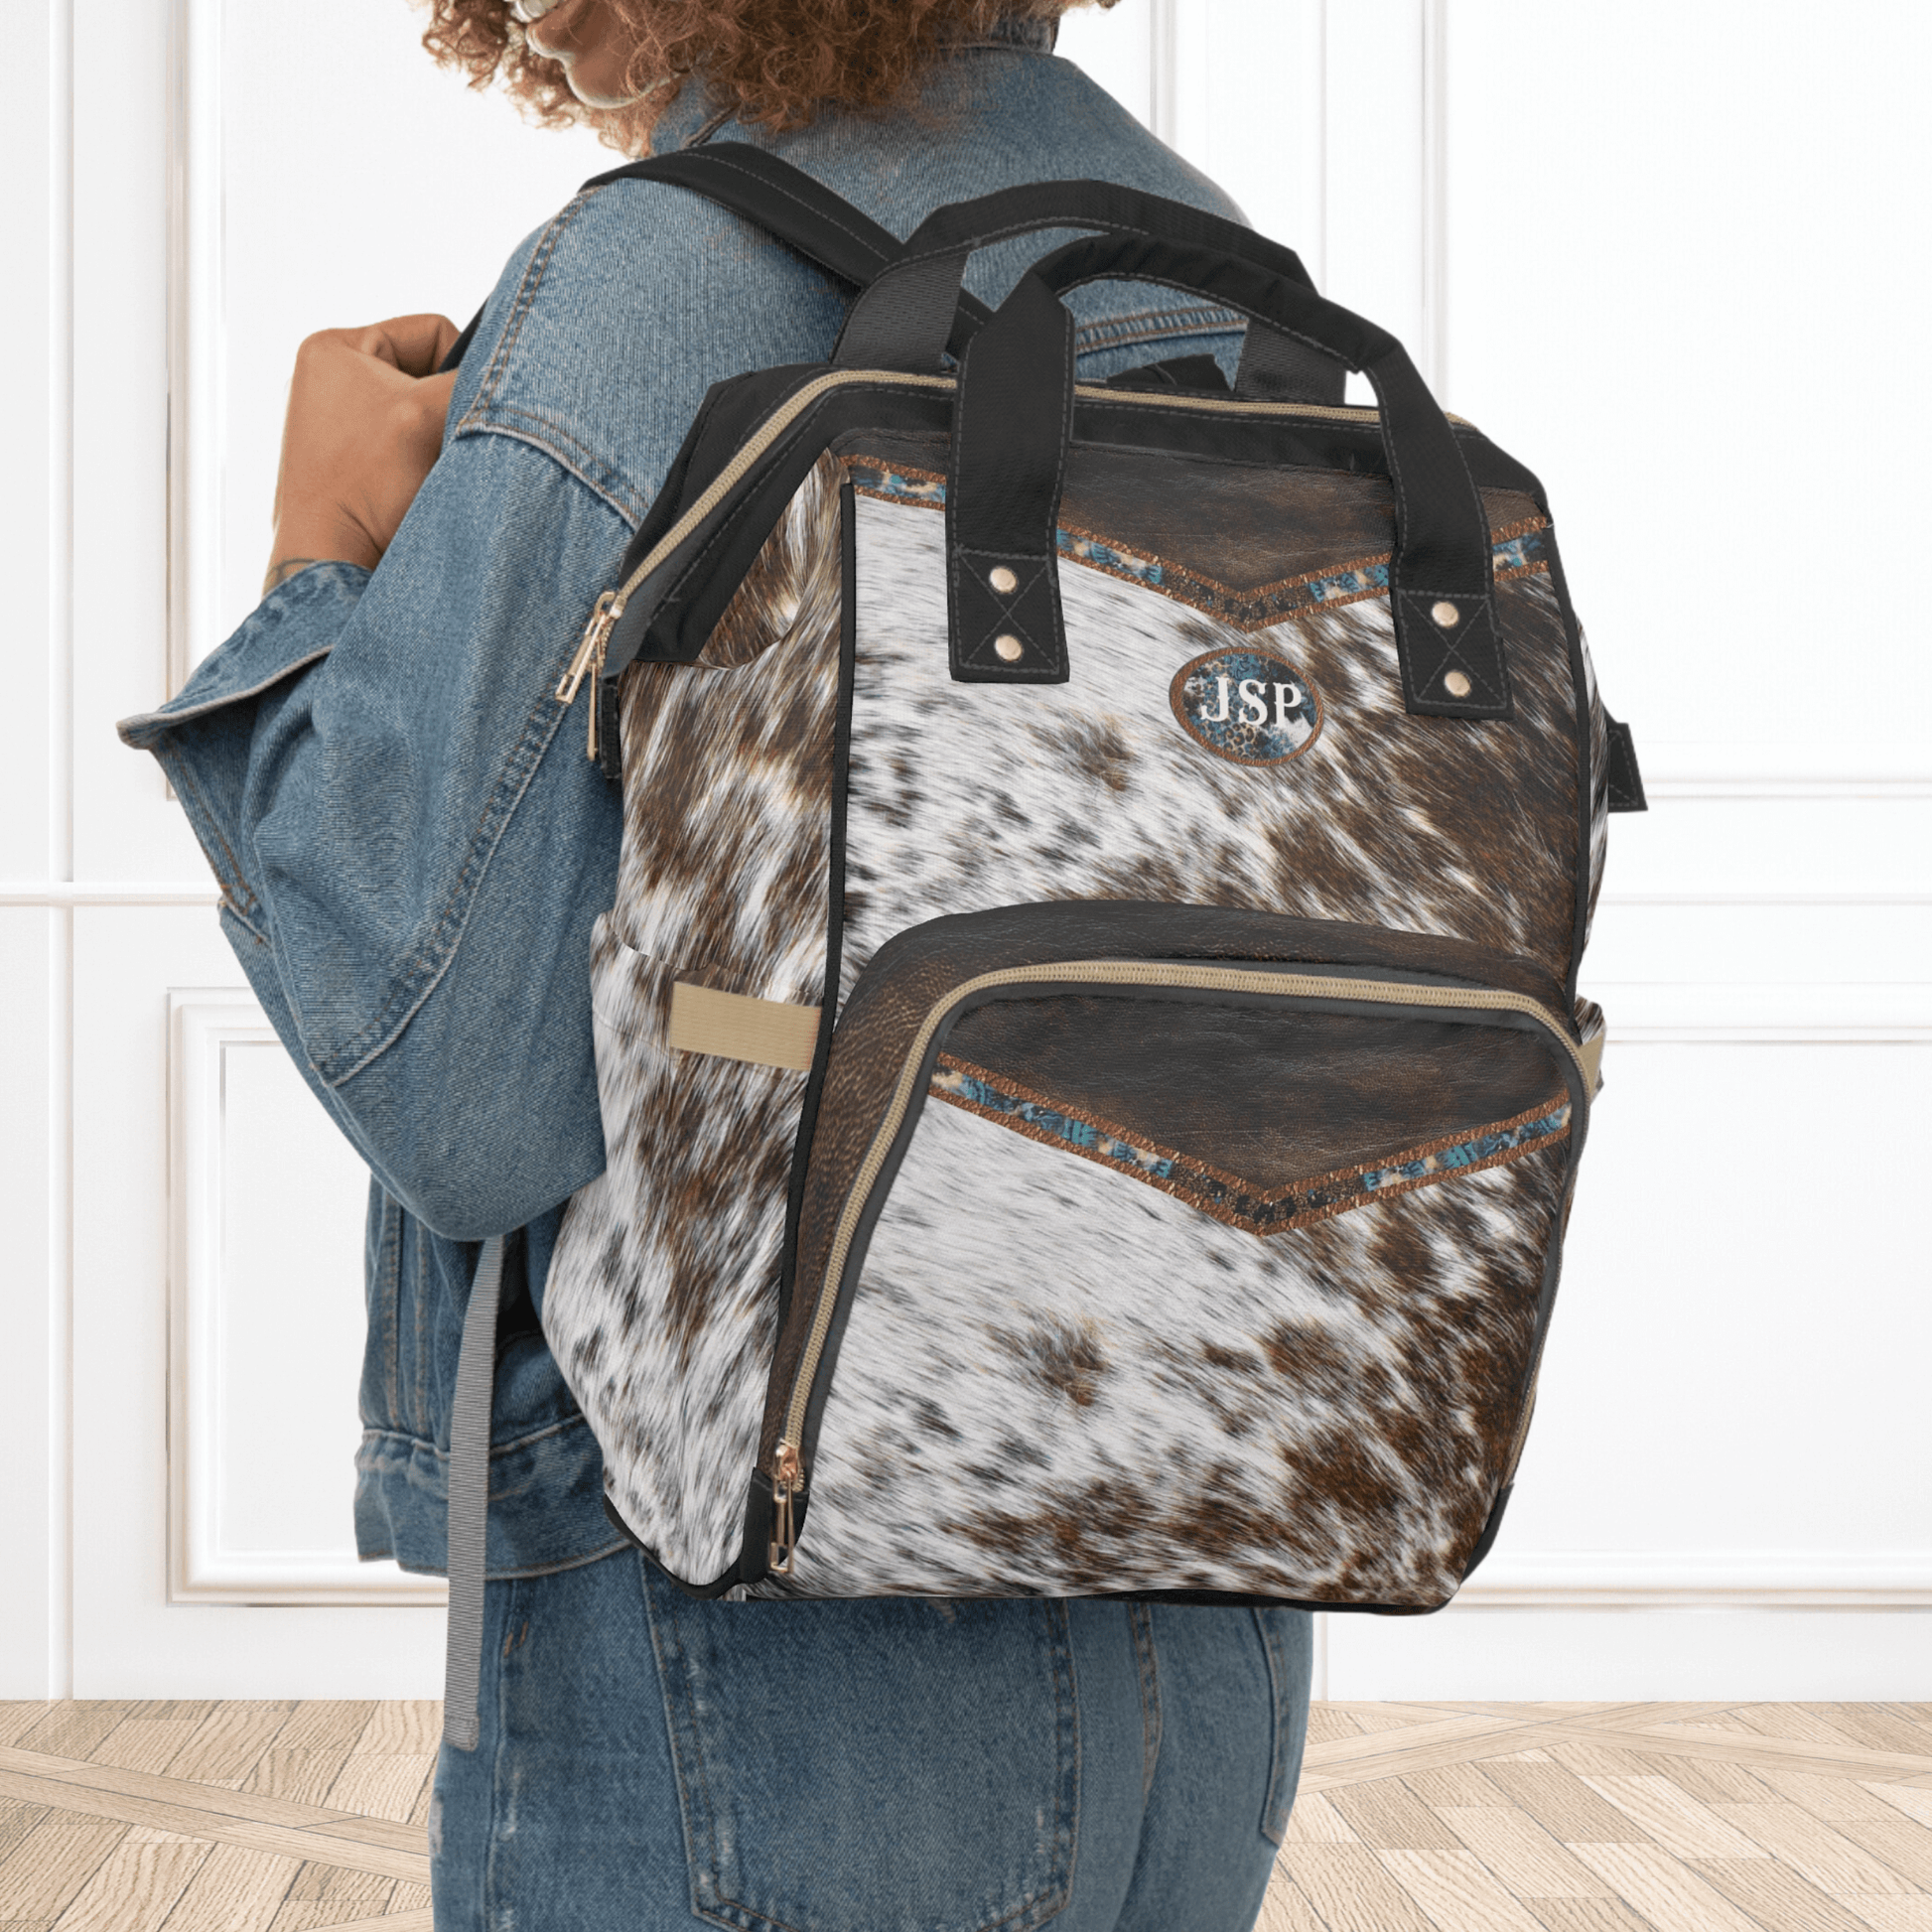 Our fancy cowhide and brown leather backpack is a print on durable nylon fabric so it looks like real cowhide but is just a print. This western travel bag makes the perfect personalized birthday gift for women that love to travel and be hands free